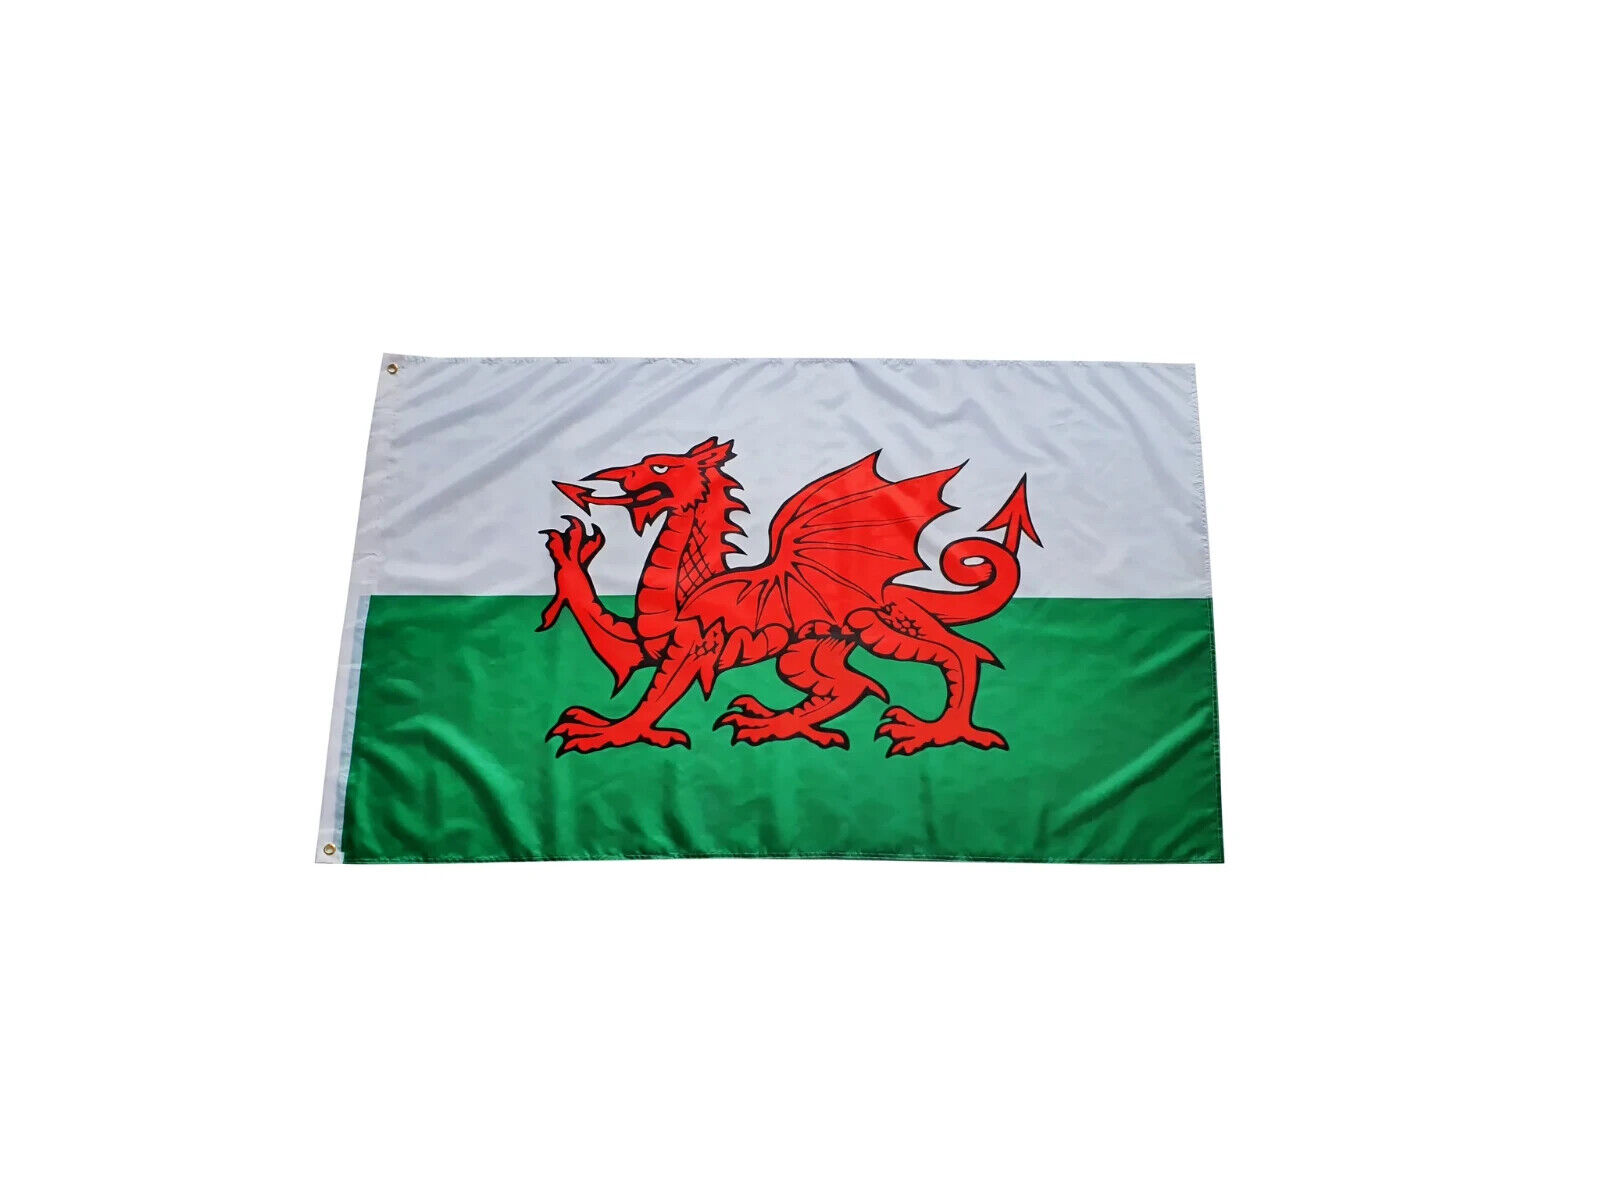 Welsh Flag 5x3' - Red Dragon of Wales - Speedy 